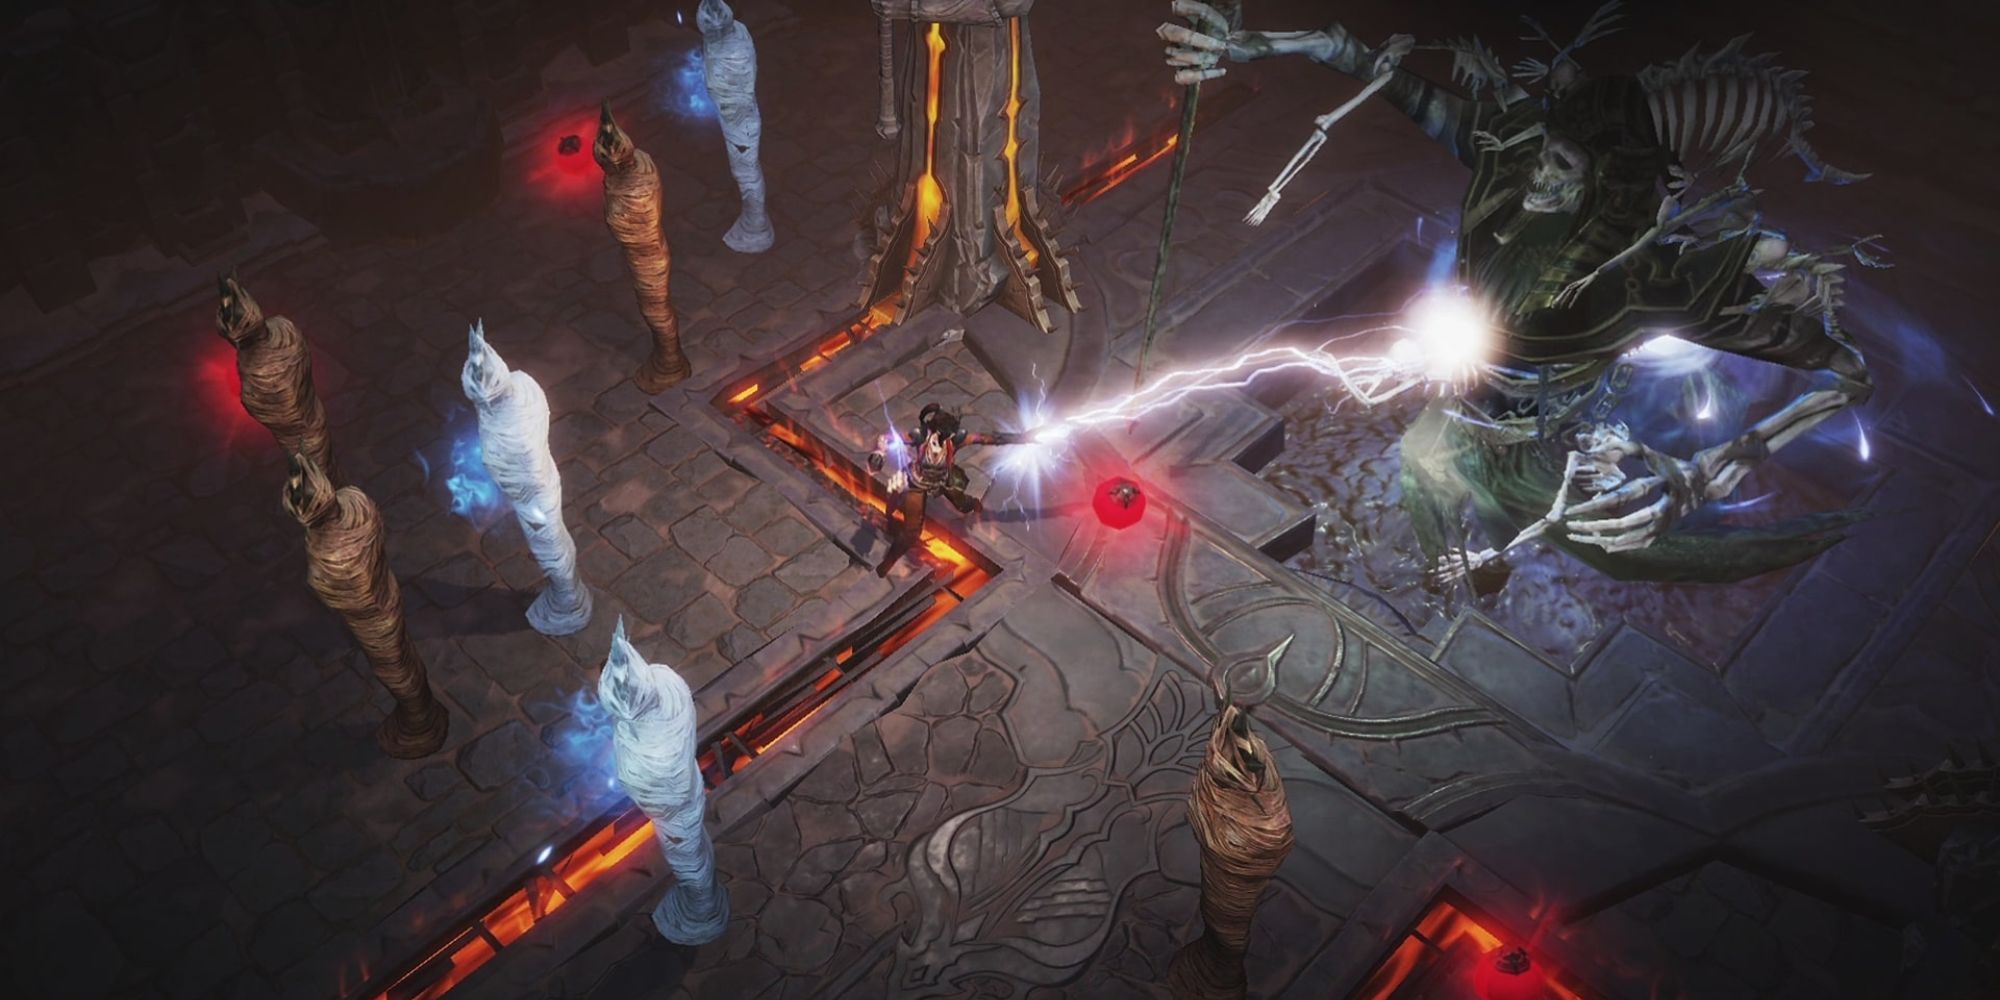 image from the game Diablo Immortal showing a player character fighting an enemy with magical powers